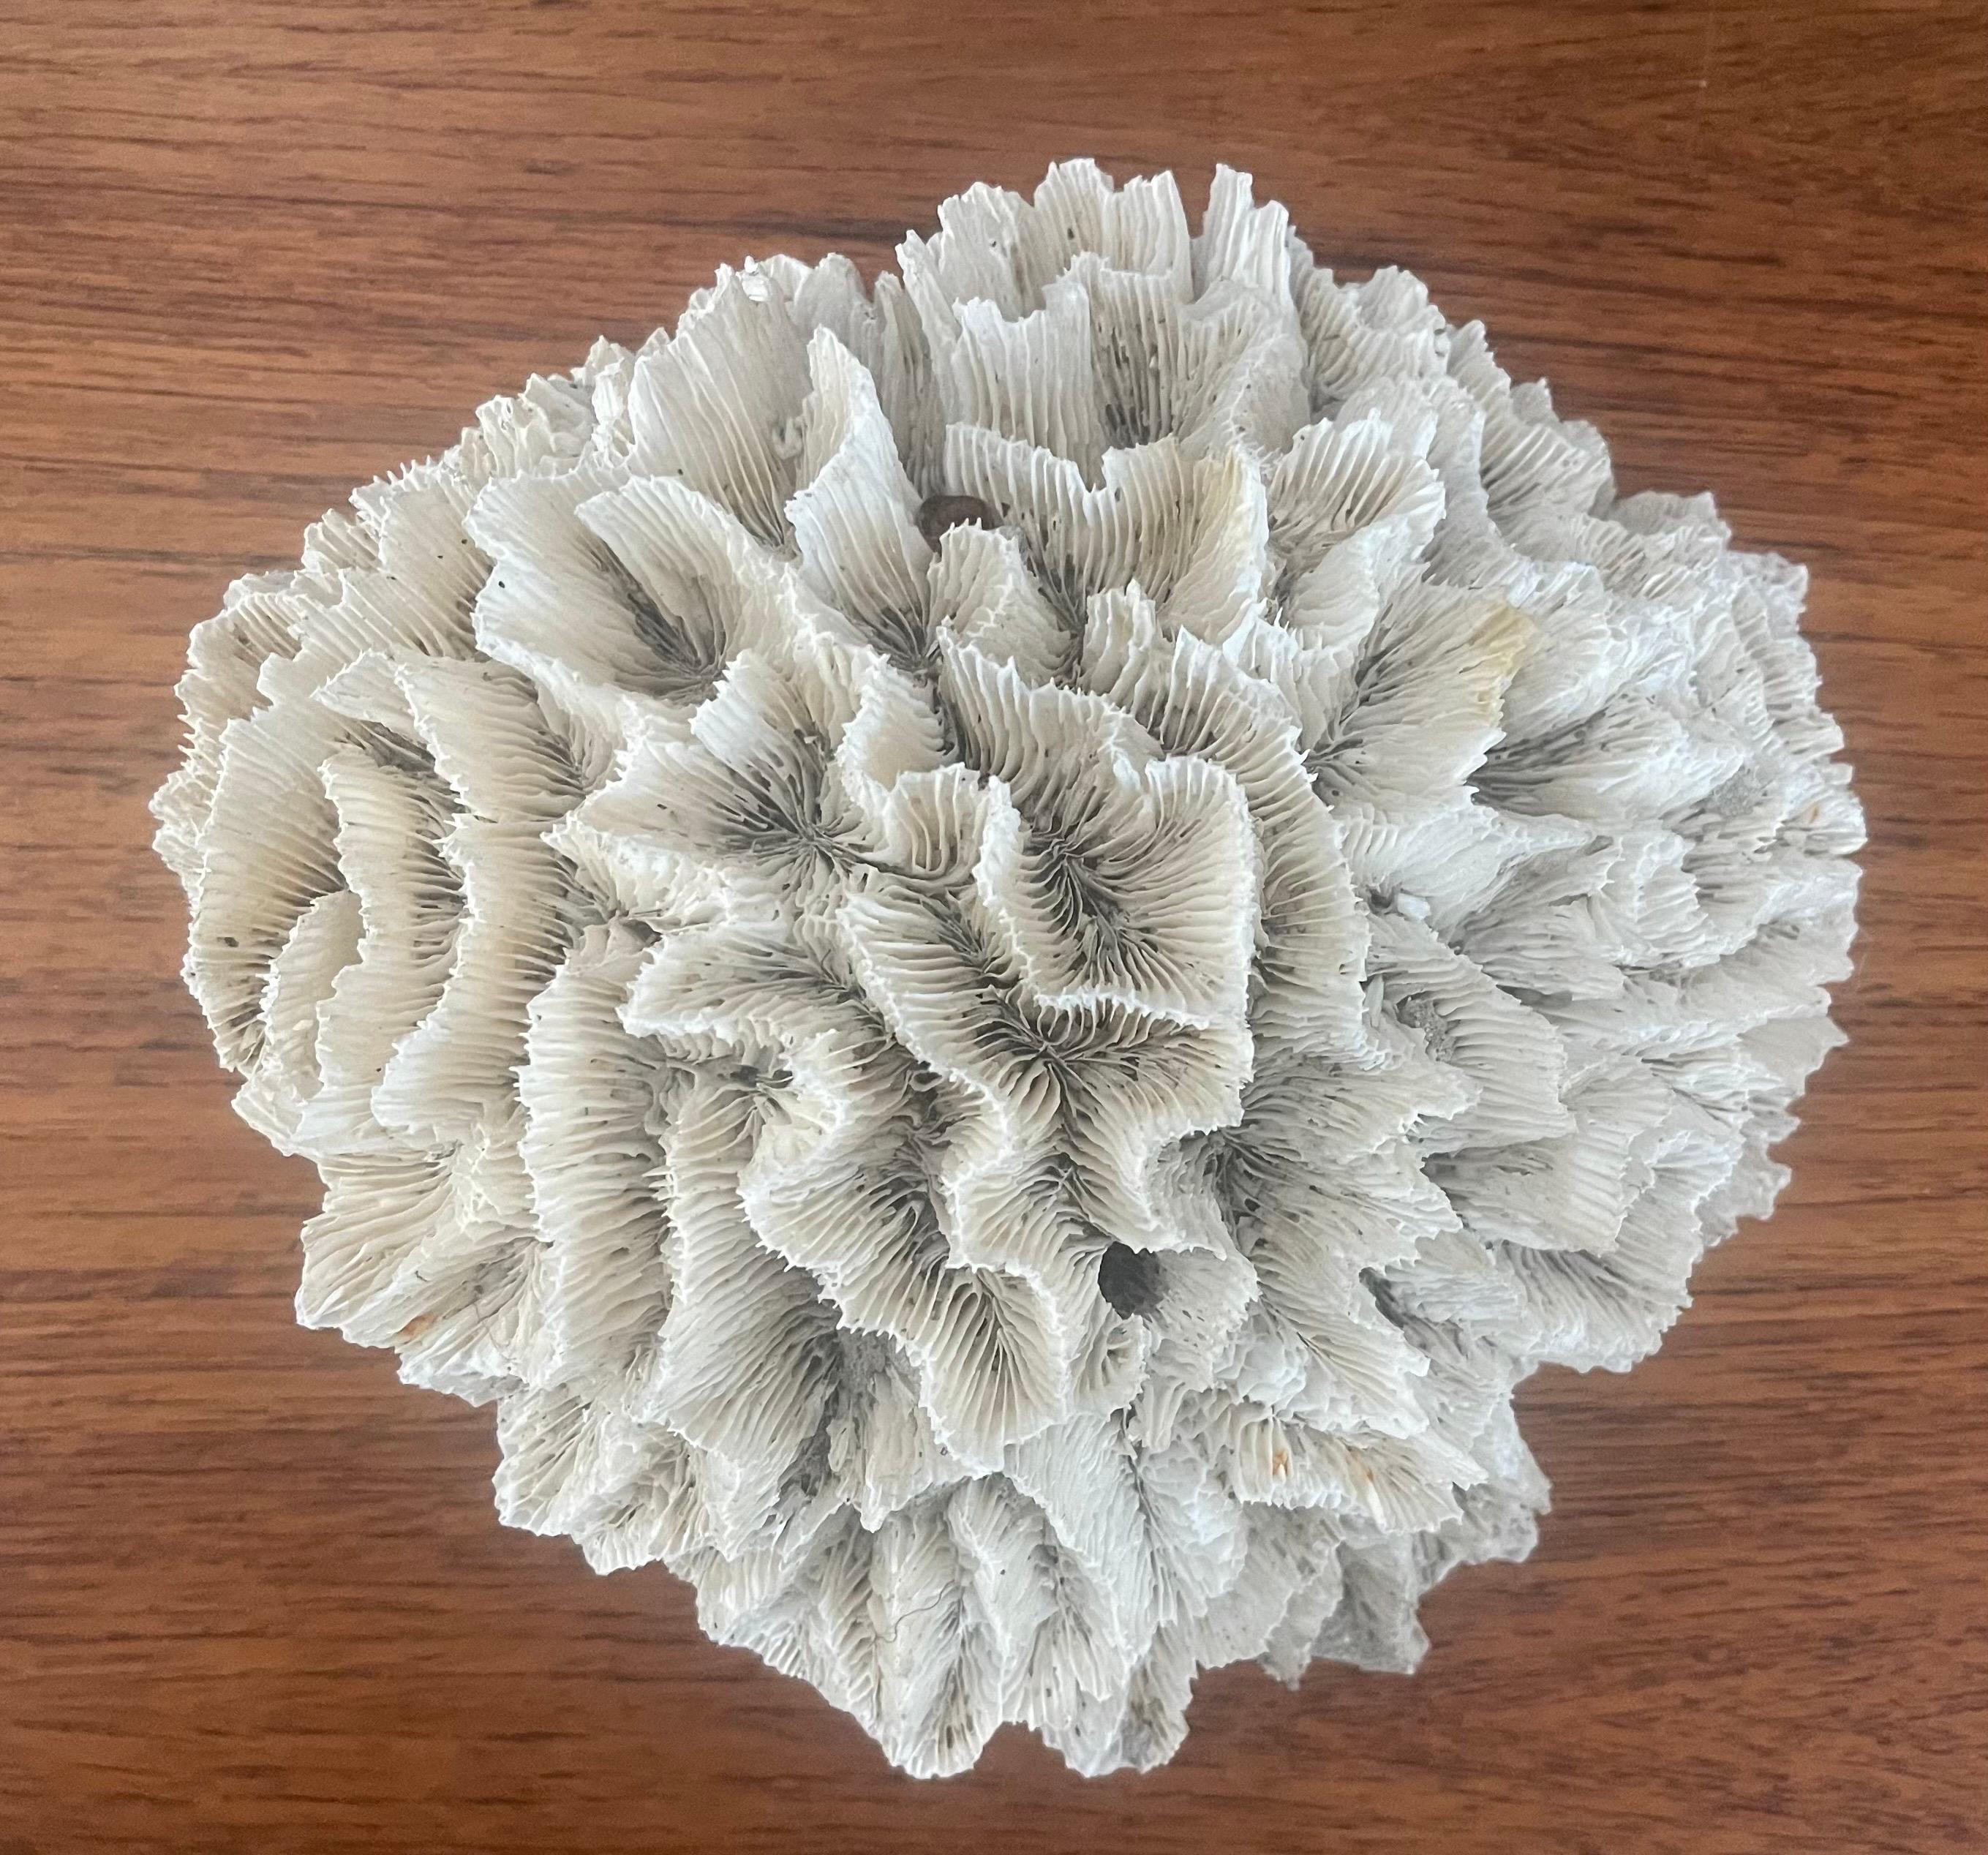 A rare and large natural white sea coral specimen, circa 1970s. The piece is in great condition and measures 8.5